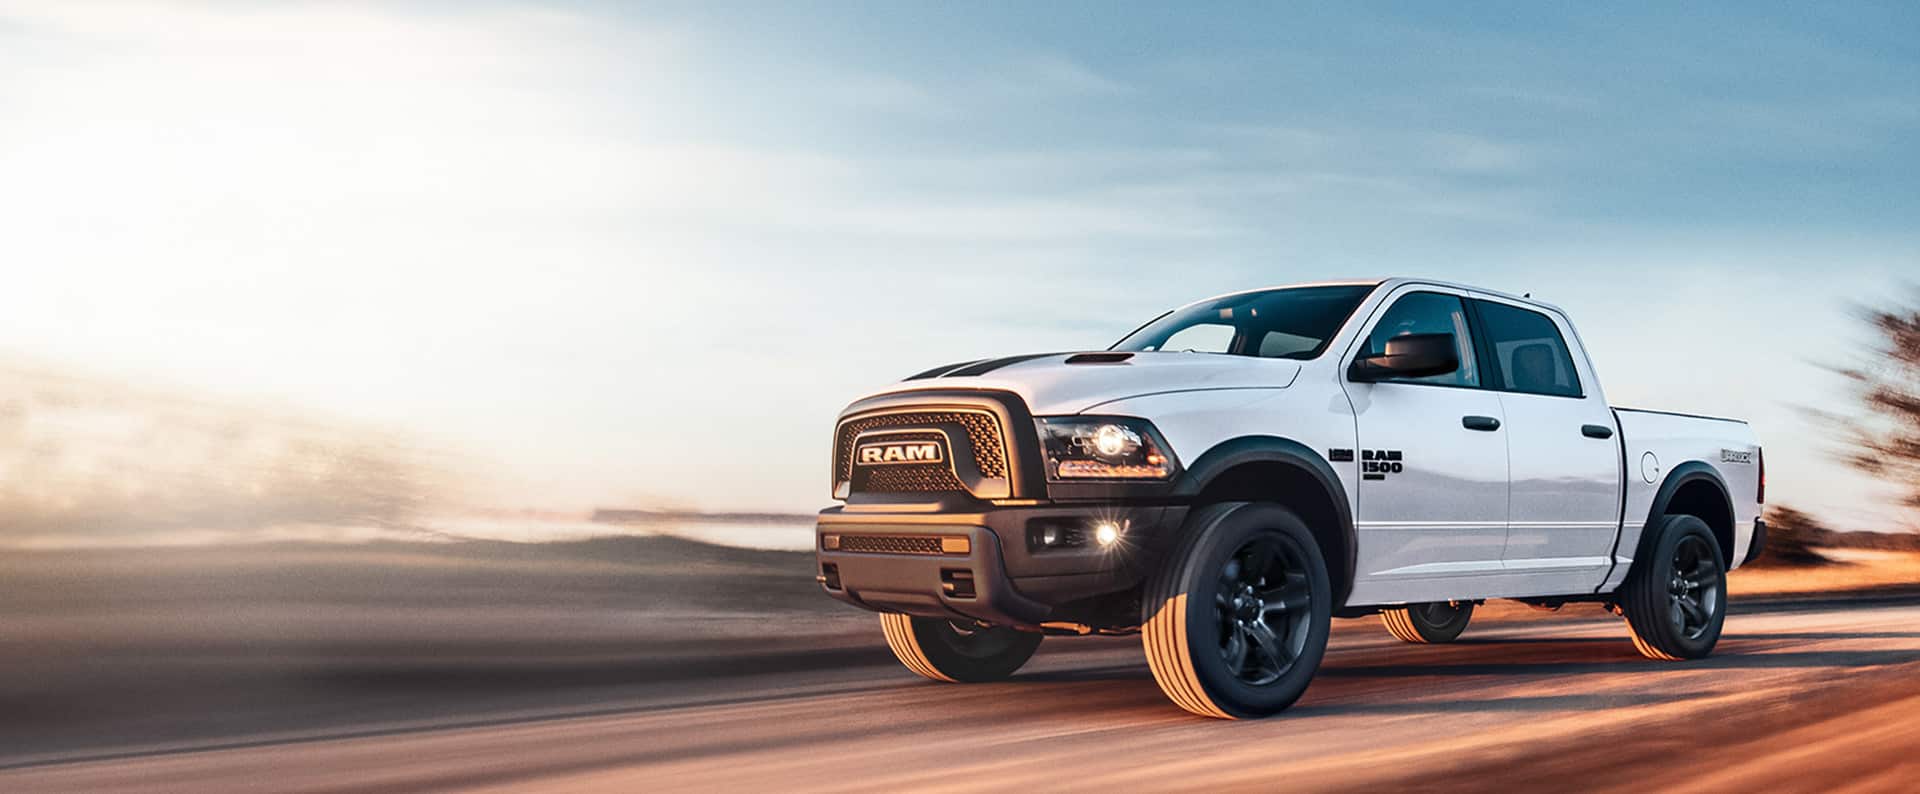 A white 2024 Ram 1500 Classic Warlock Crew Cab being driven down a highway. The background is blurred to indicate the vehicle is in motion.